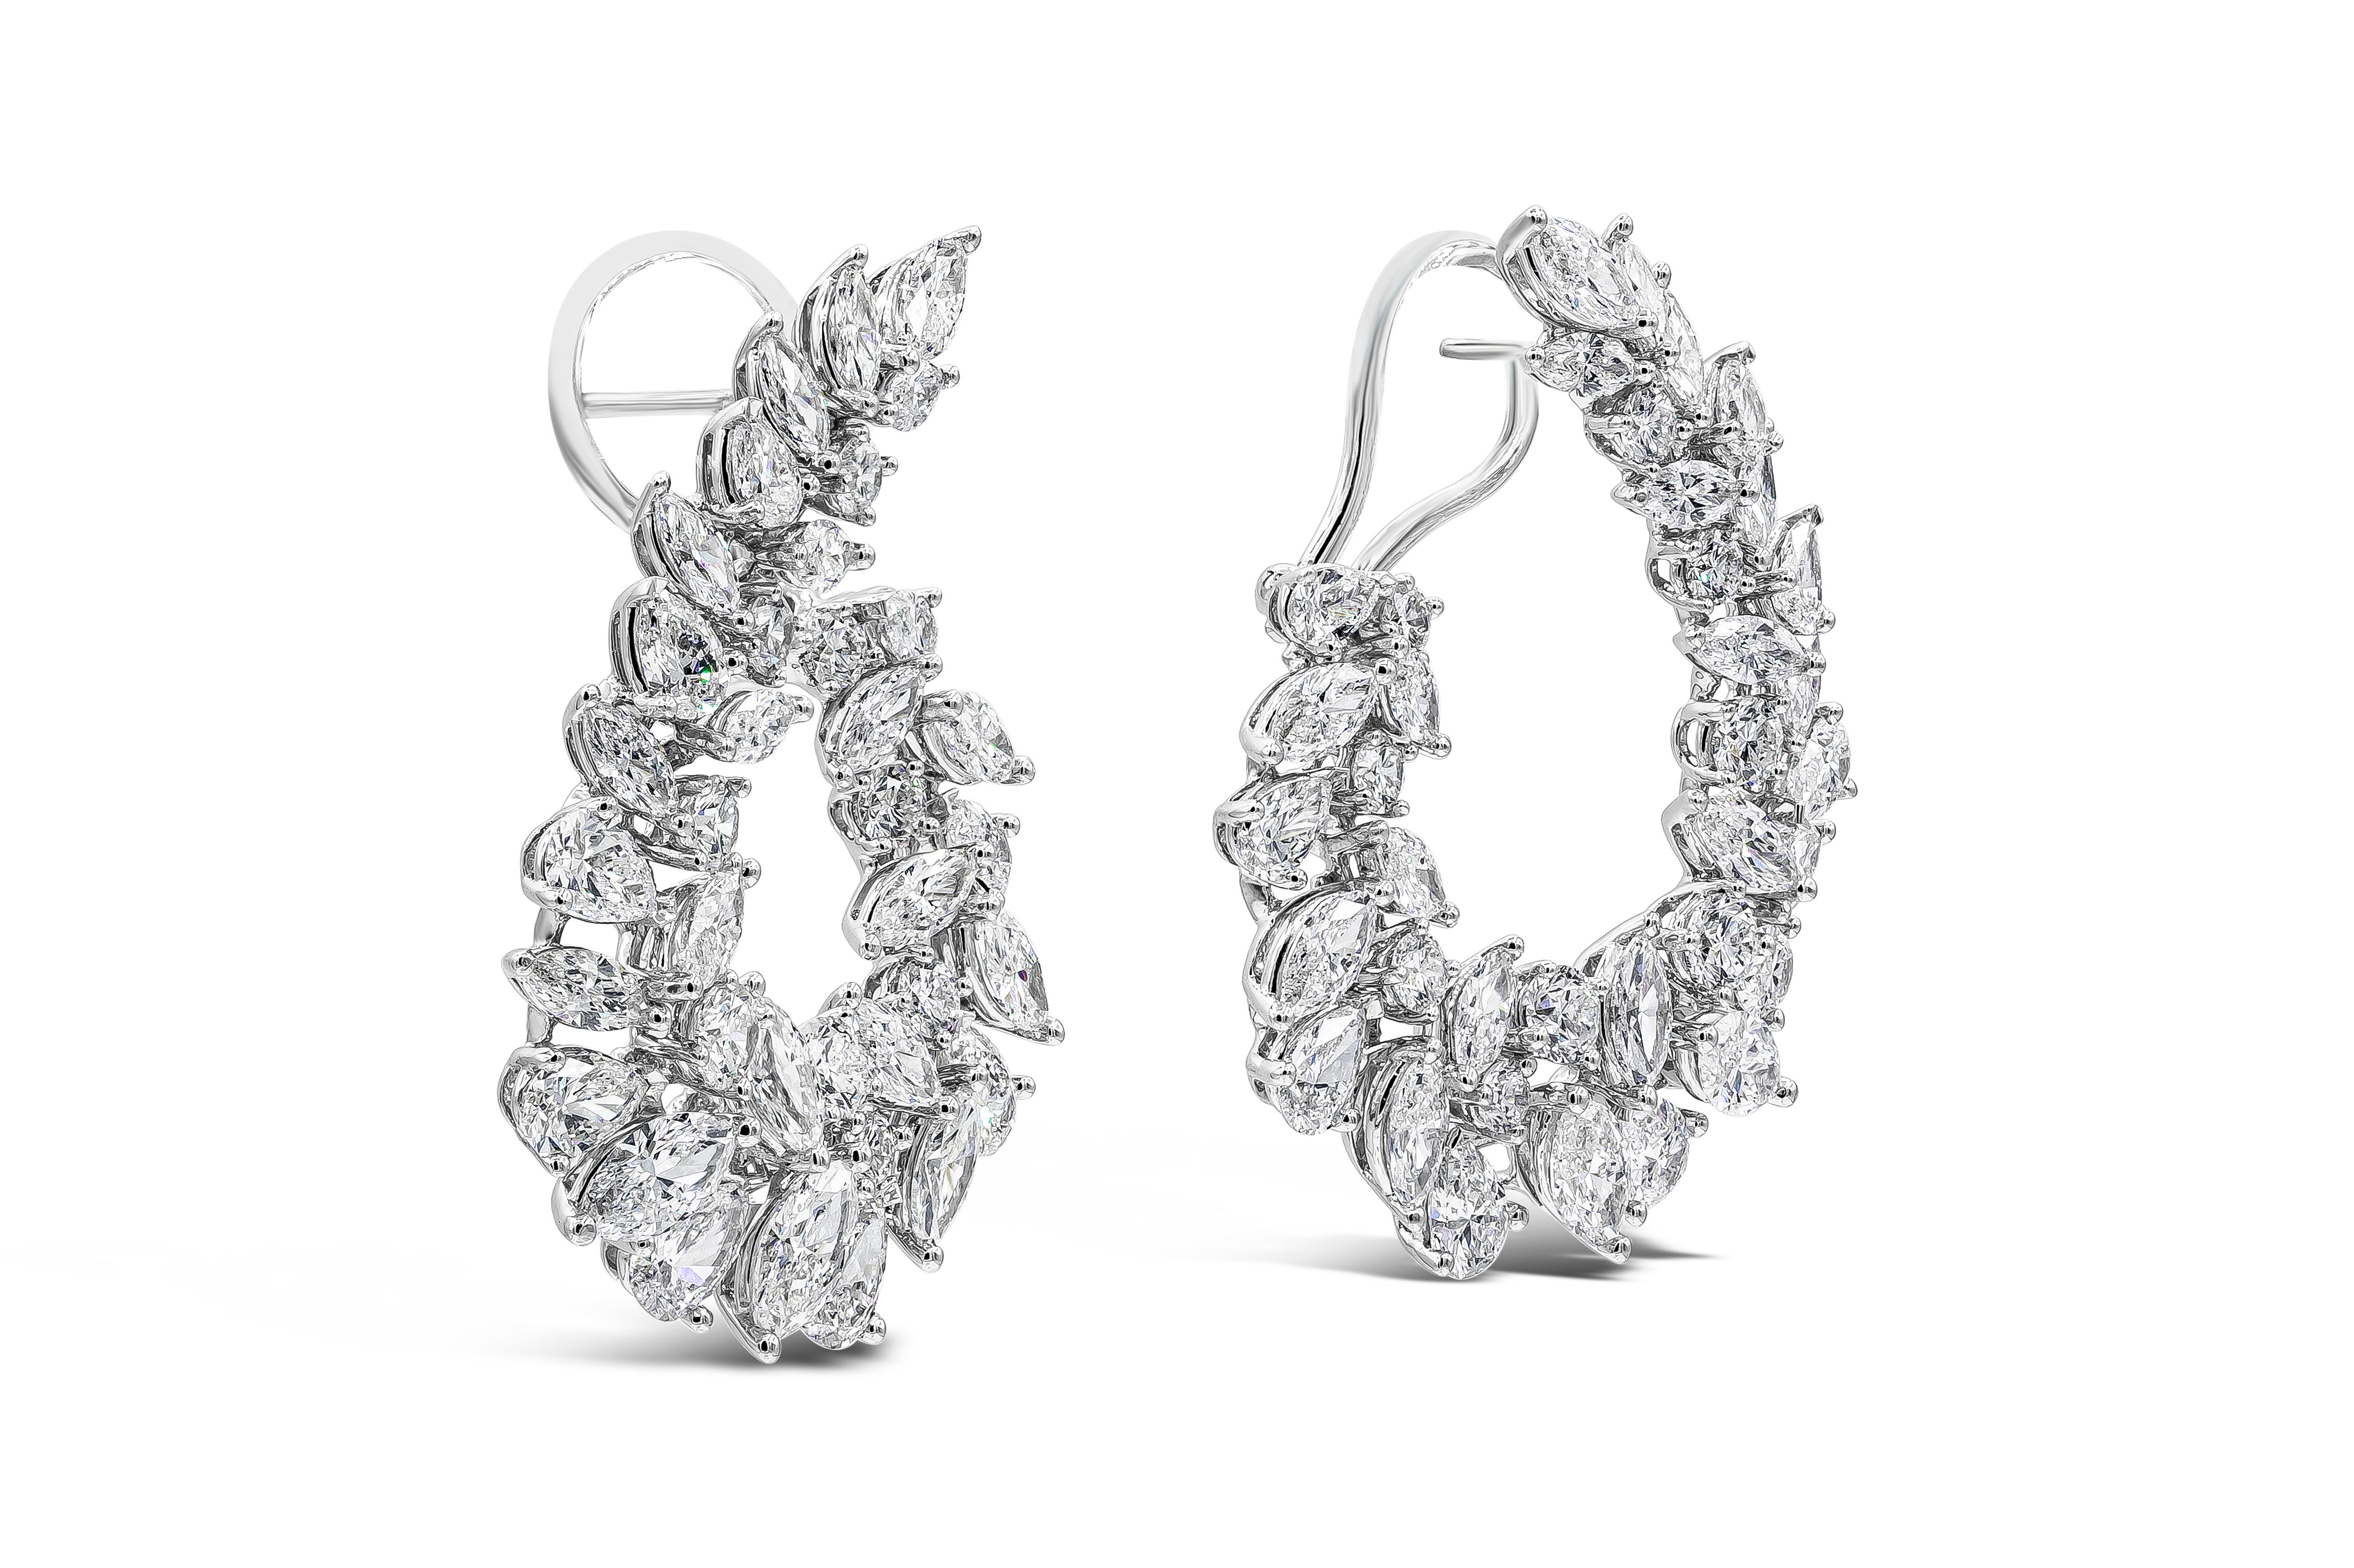 A unique and beautiful piece of jewelry showcasing a combination of brilliant pear shape, marquise and round cut diamonds set in an elegant and intricate wreath design. Diamonds weigh 11.52 carats total and are approximately F-G colors. Earrings